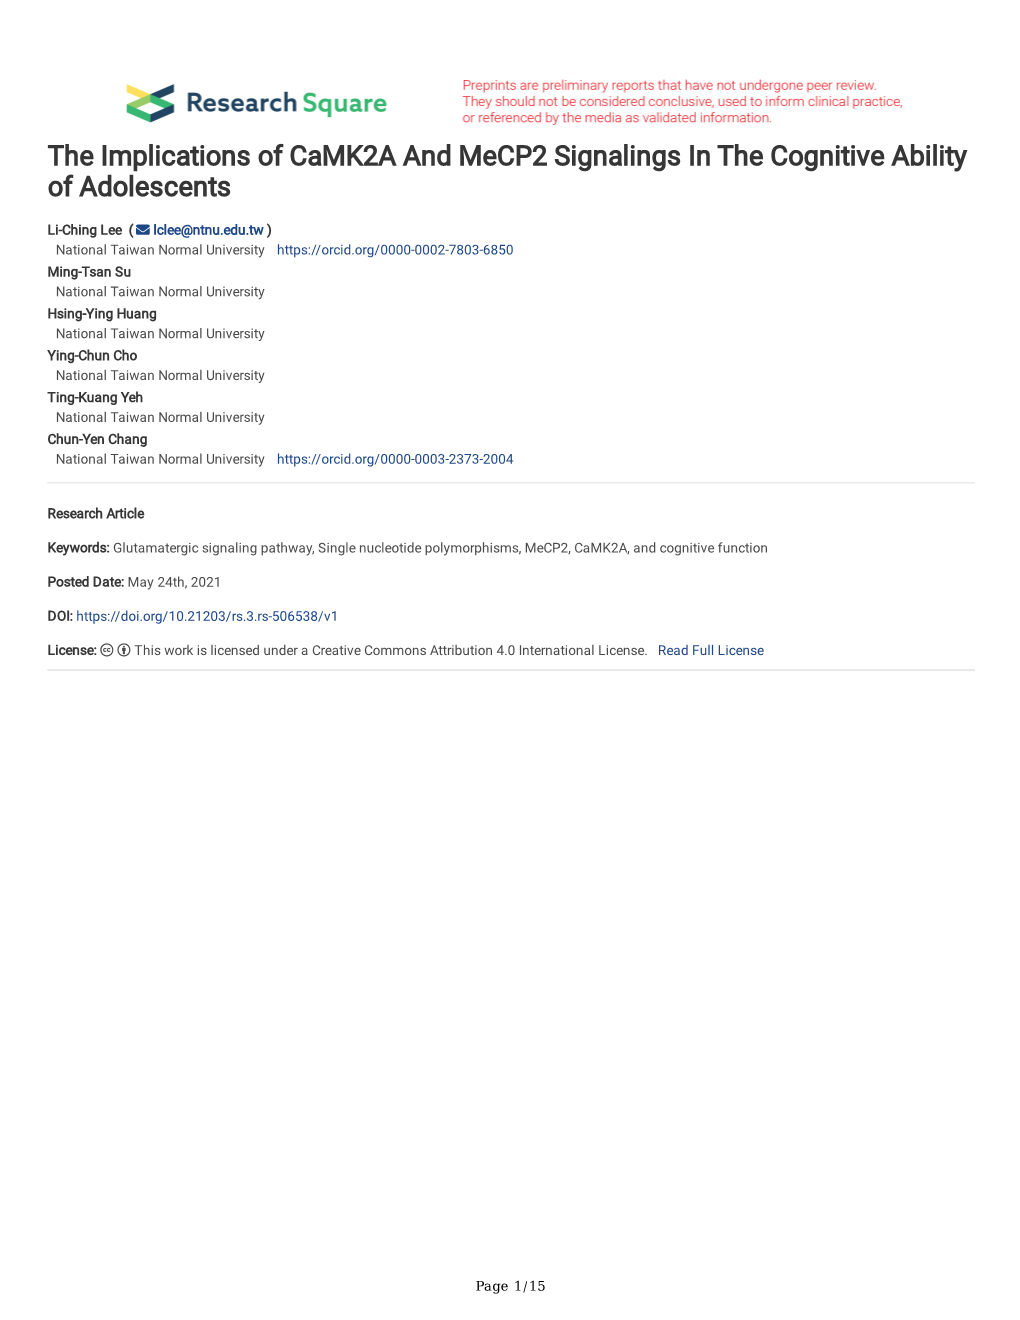 The Implications of Camk2a and Mecp2 Signalings in the Cognitive Ability of Adolescents